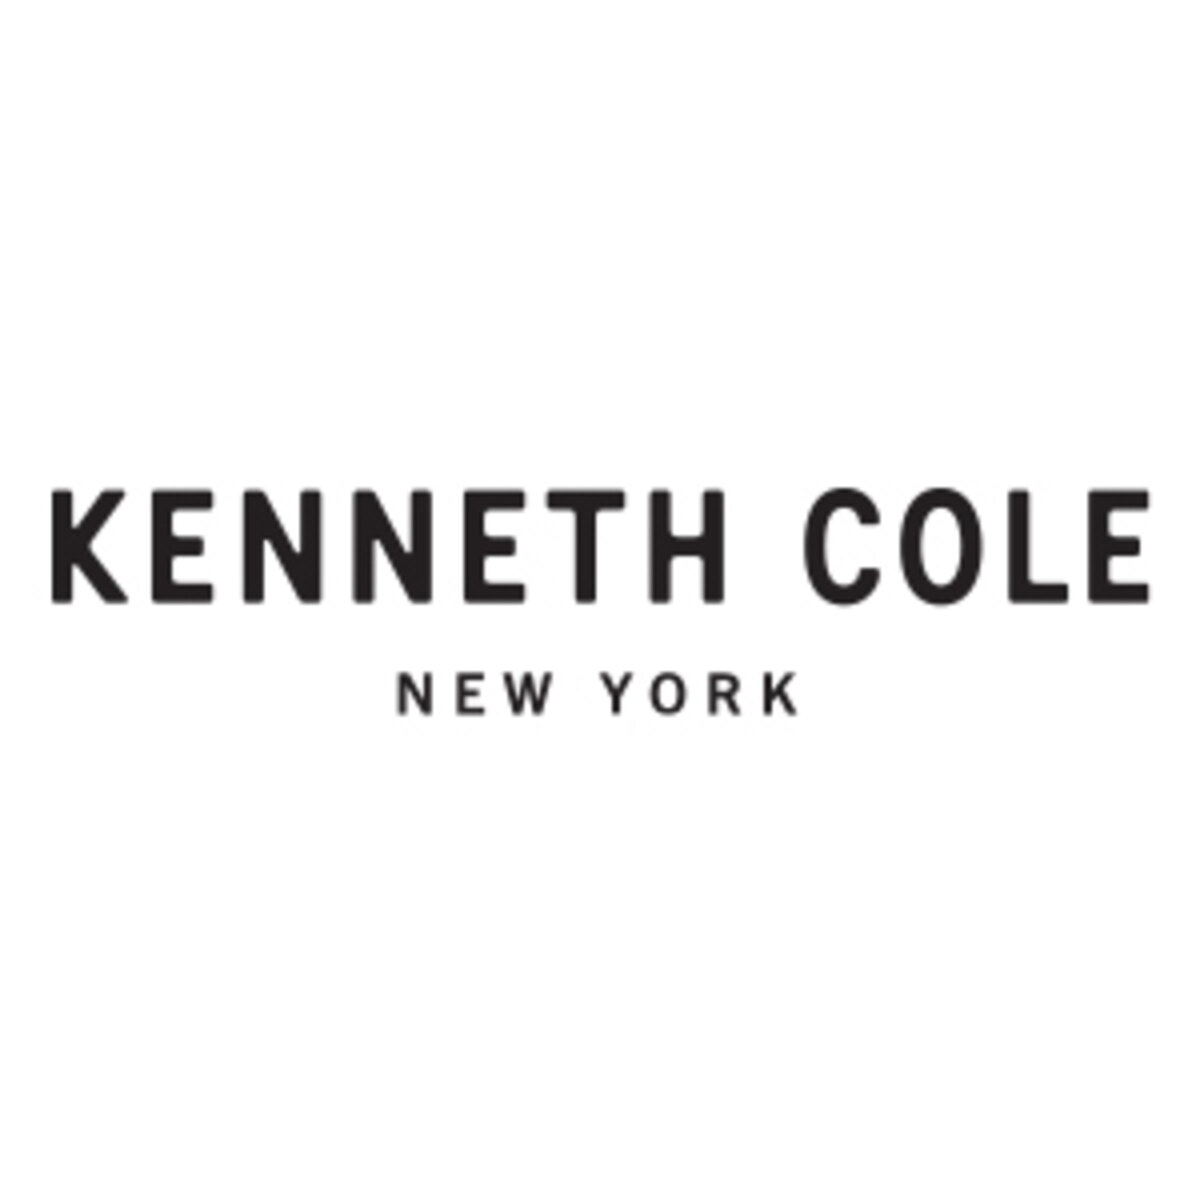 Kenneth Cole - Discounts for Military & Gov't | GovX